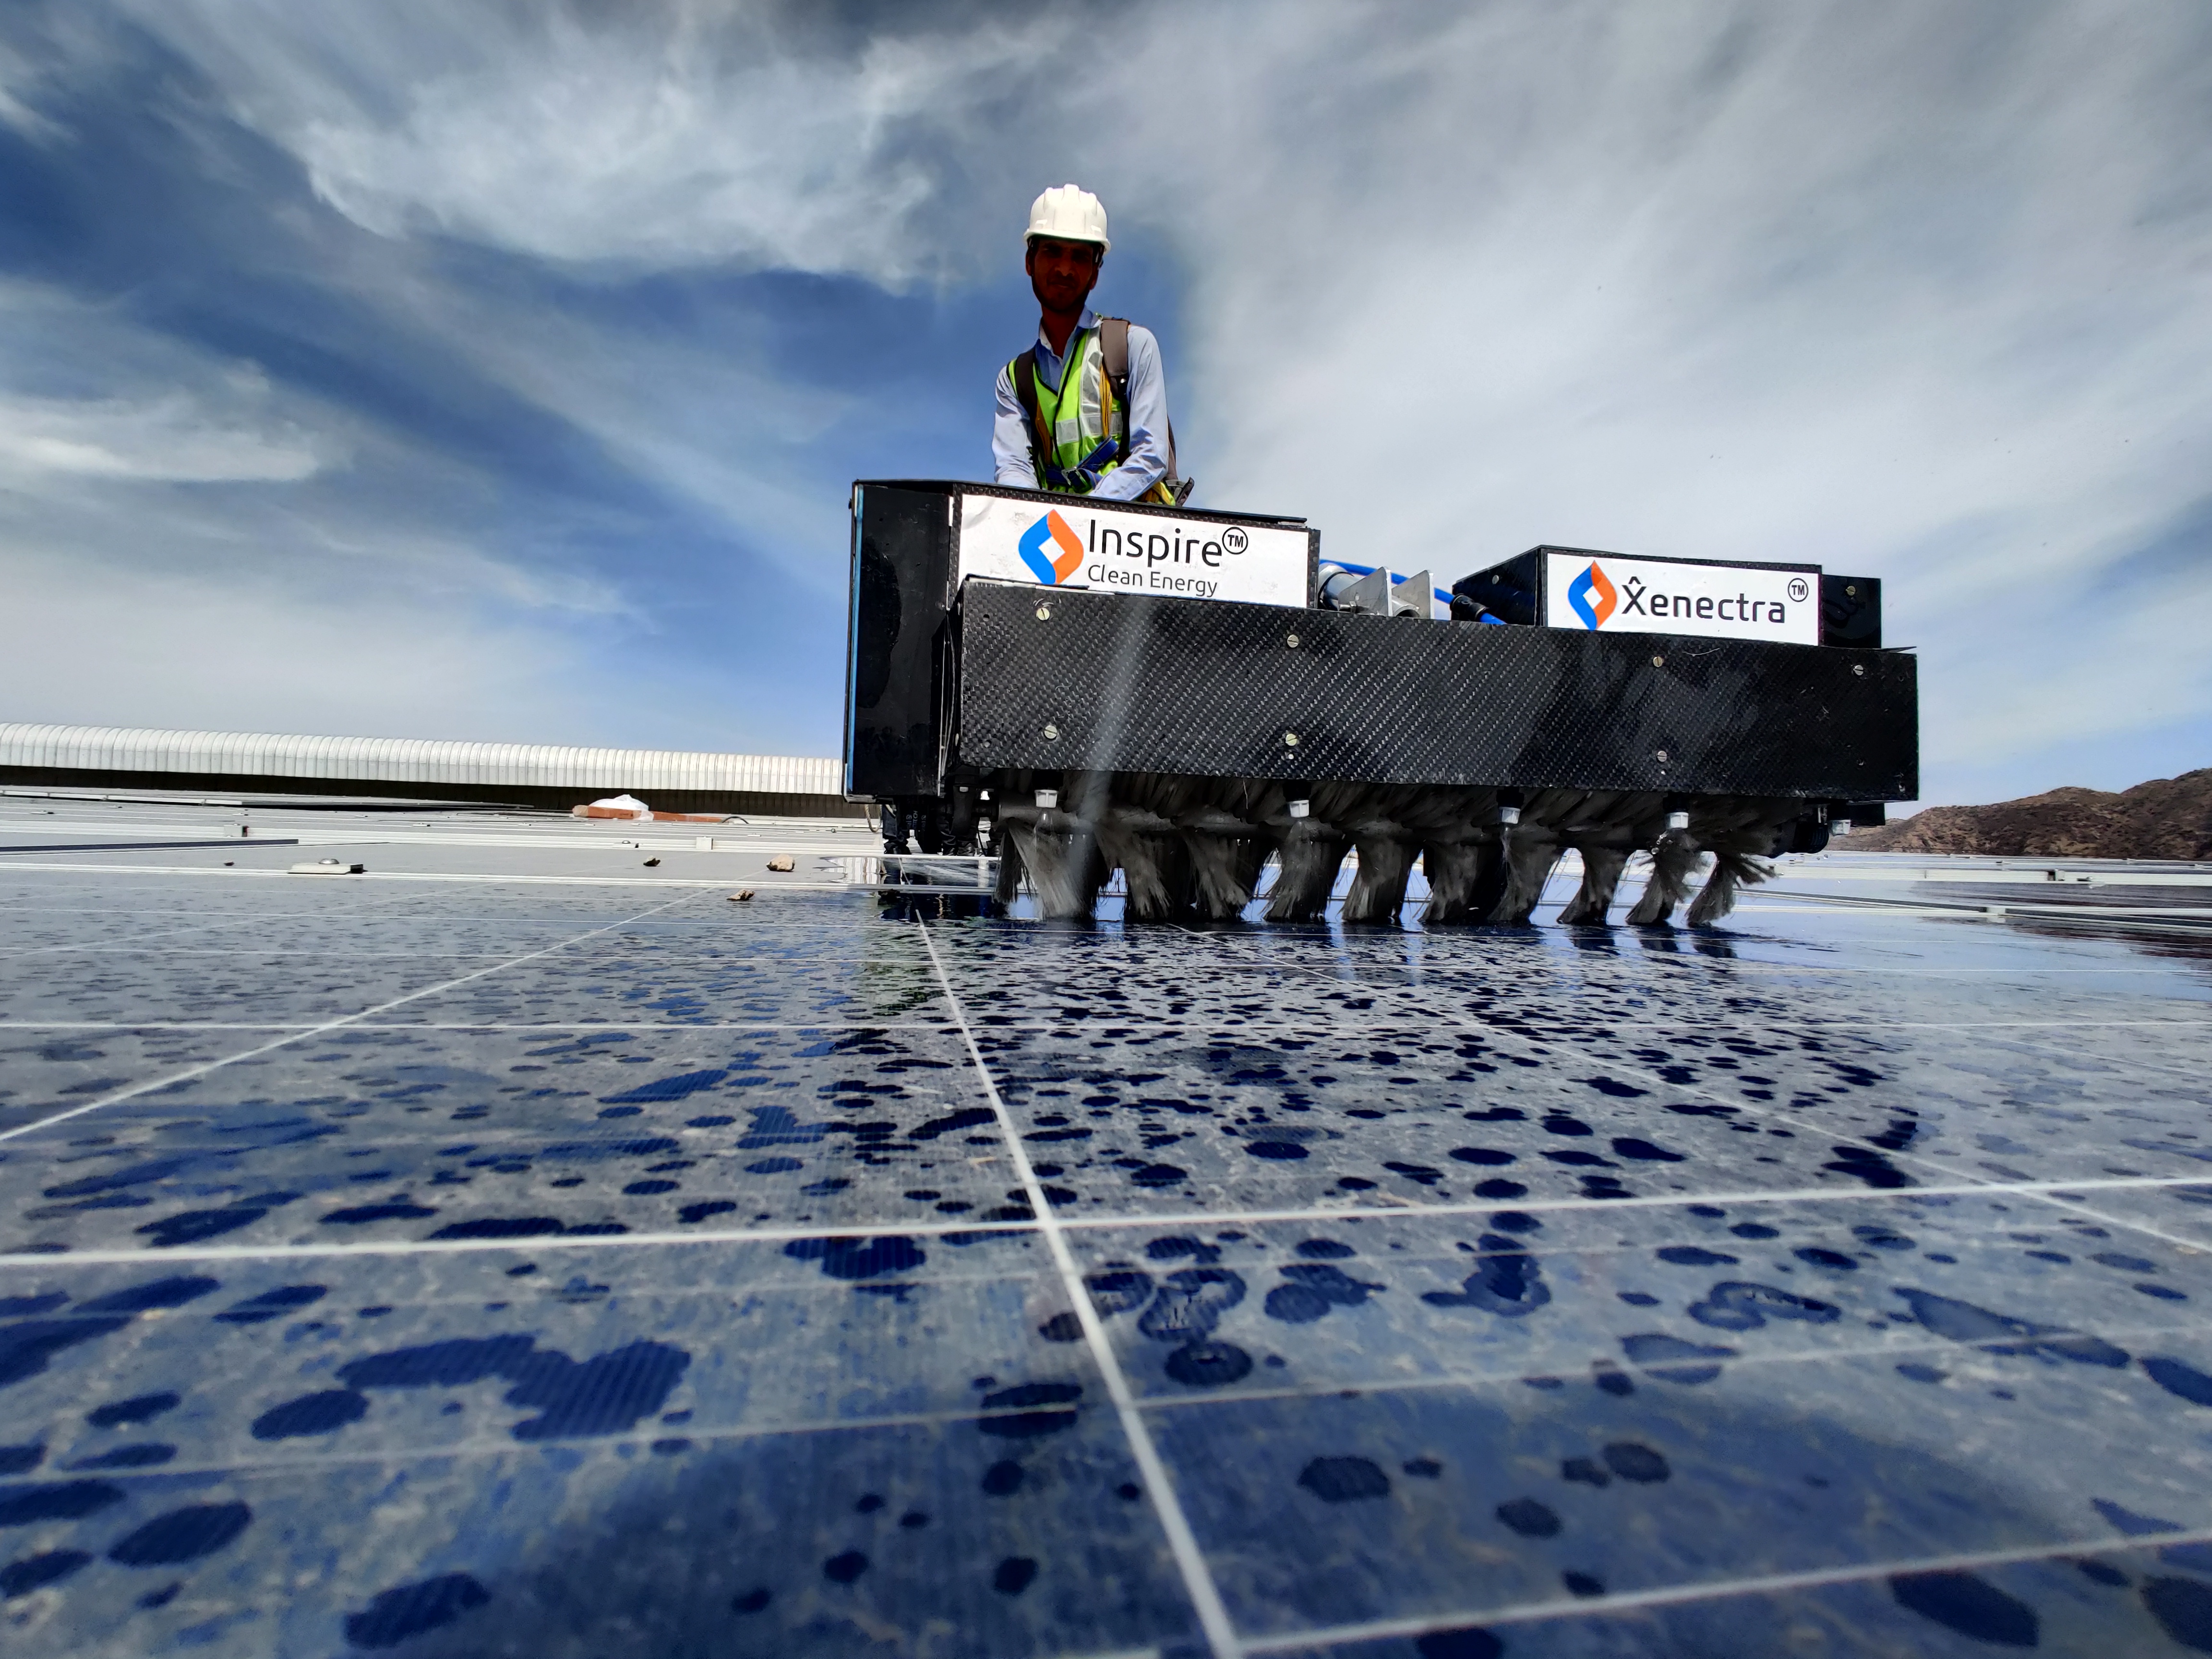 CoBOT600 used for cleaning the dust in the roof top solar panels by a worker in the inspire clean energy